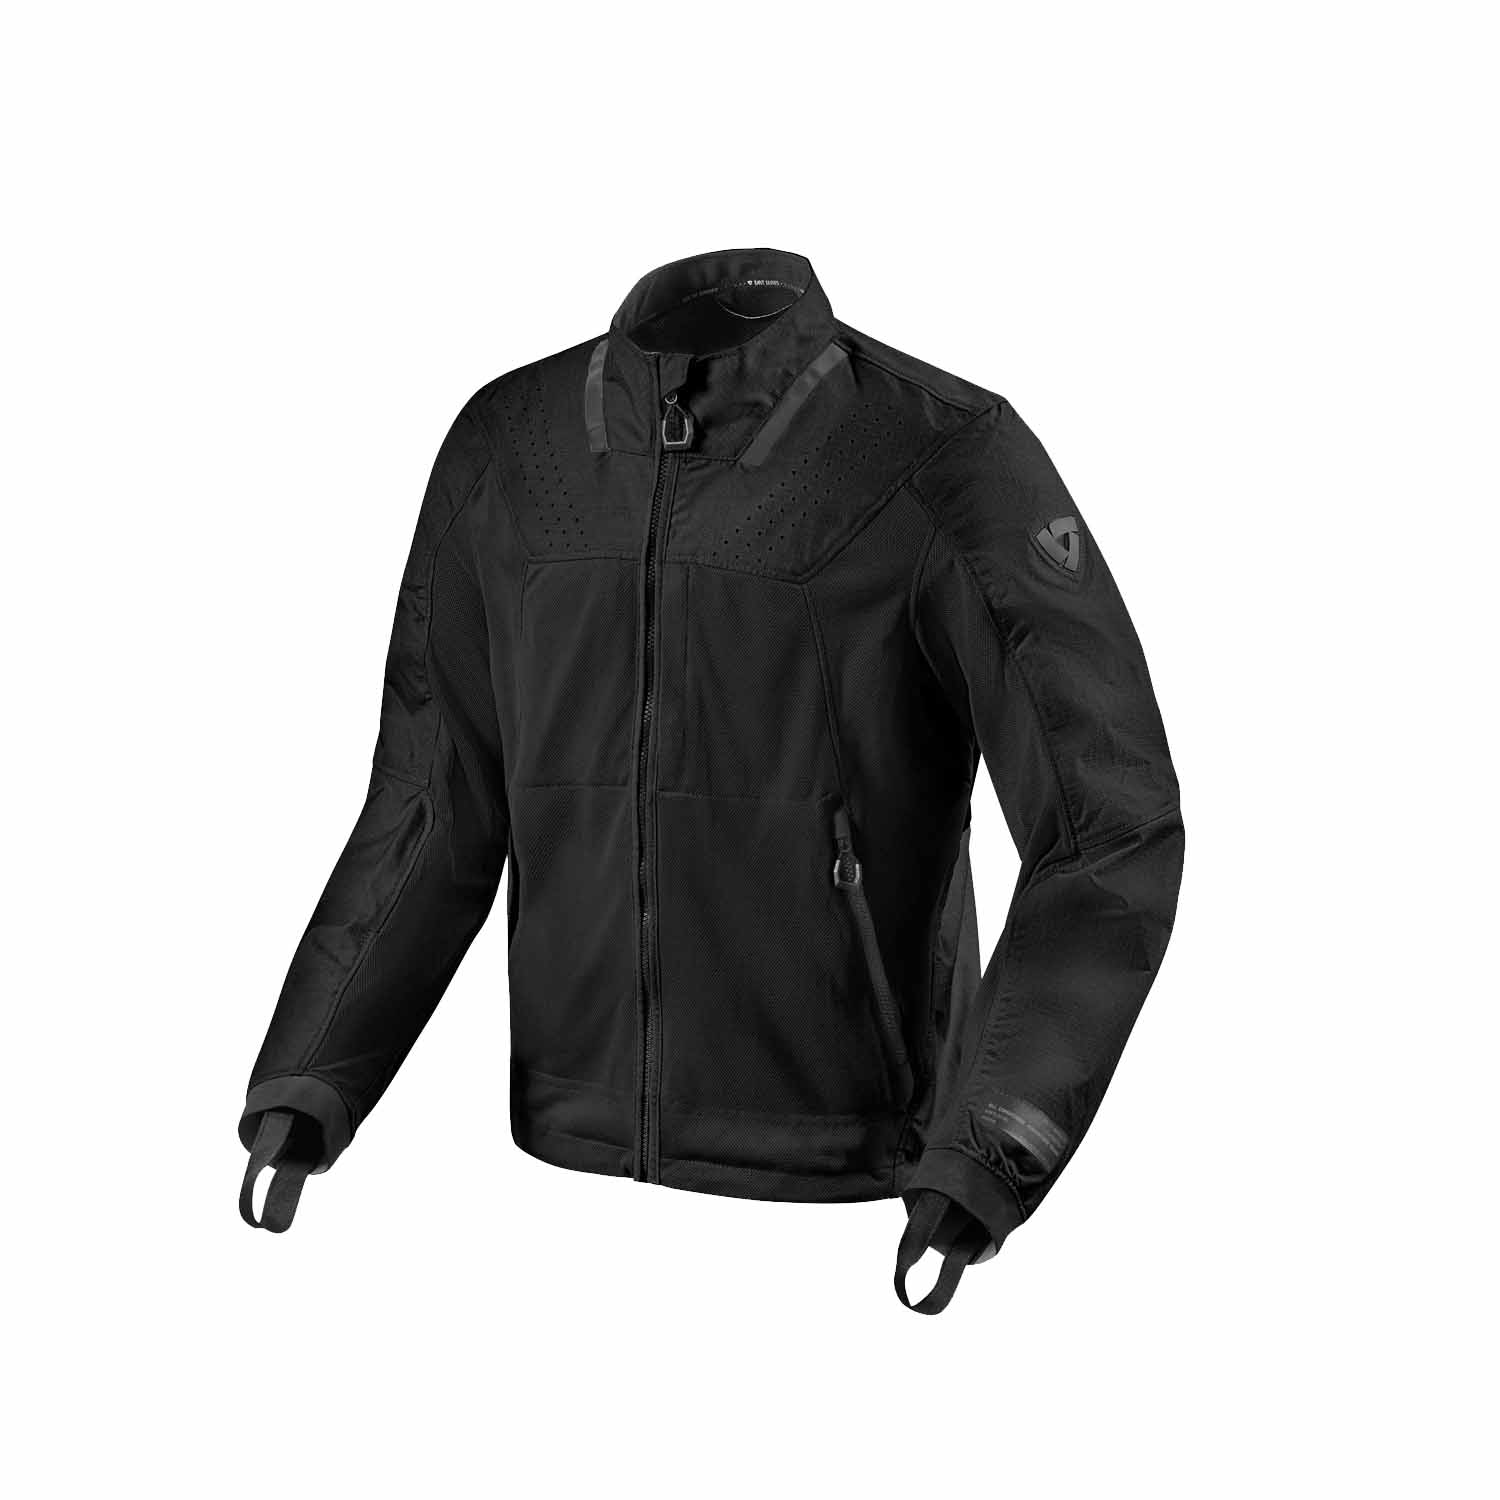 Image of REV'IT! Territory Jacket Black Standard Taille L